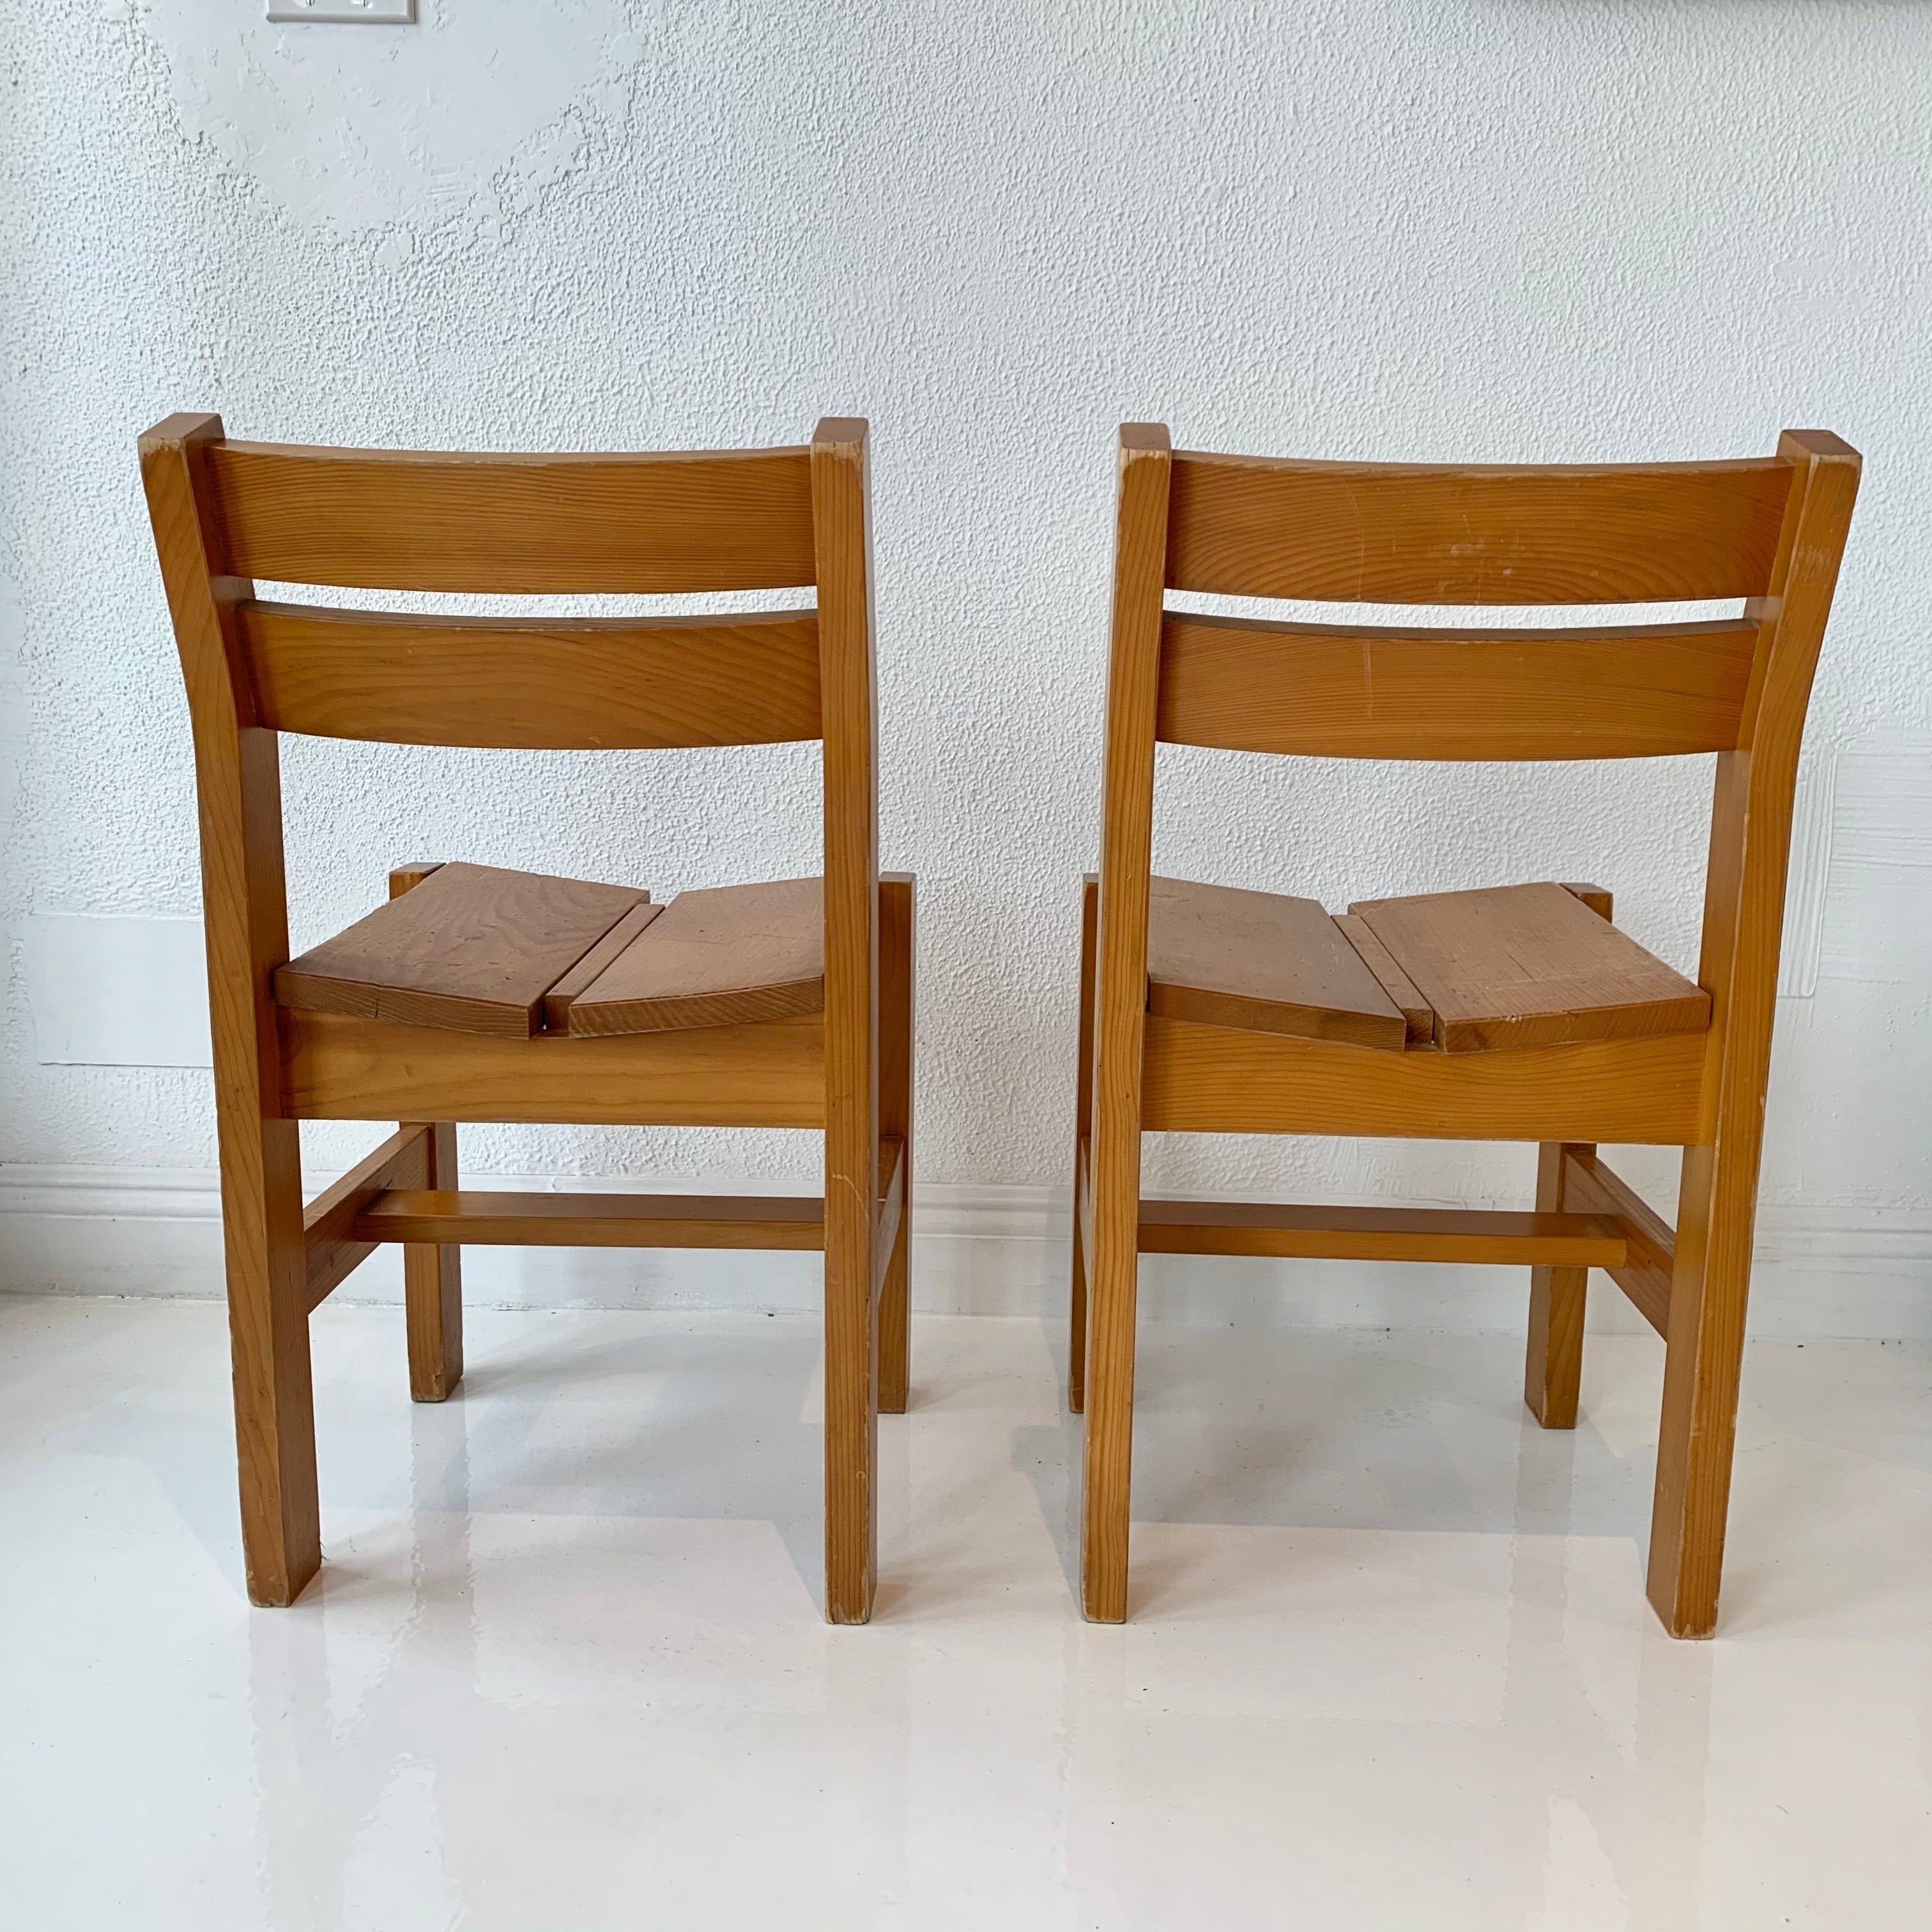 Charlotte Perriand - Charlotte Perriand pair of slipper lounge chairs for  hotel La Cachette Les Arcs